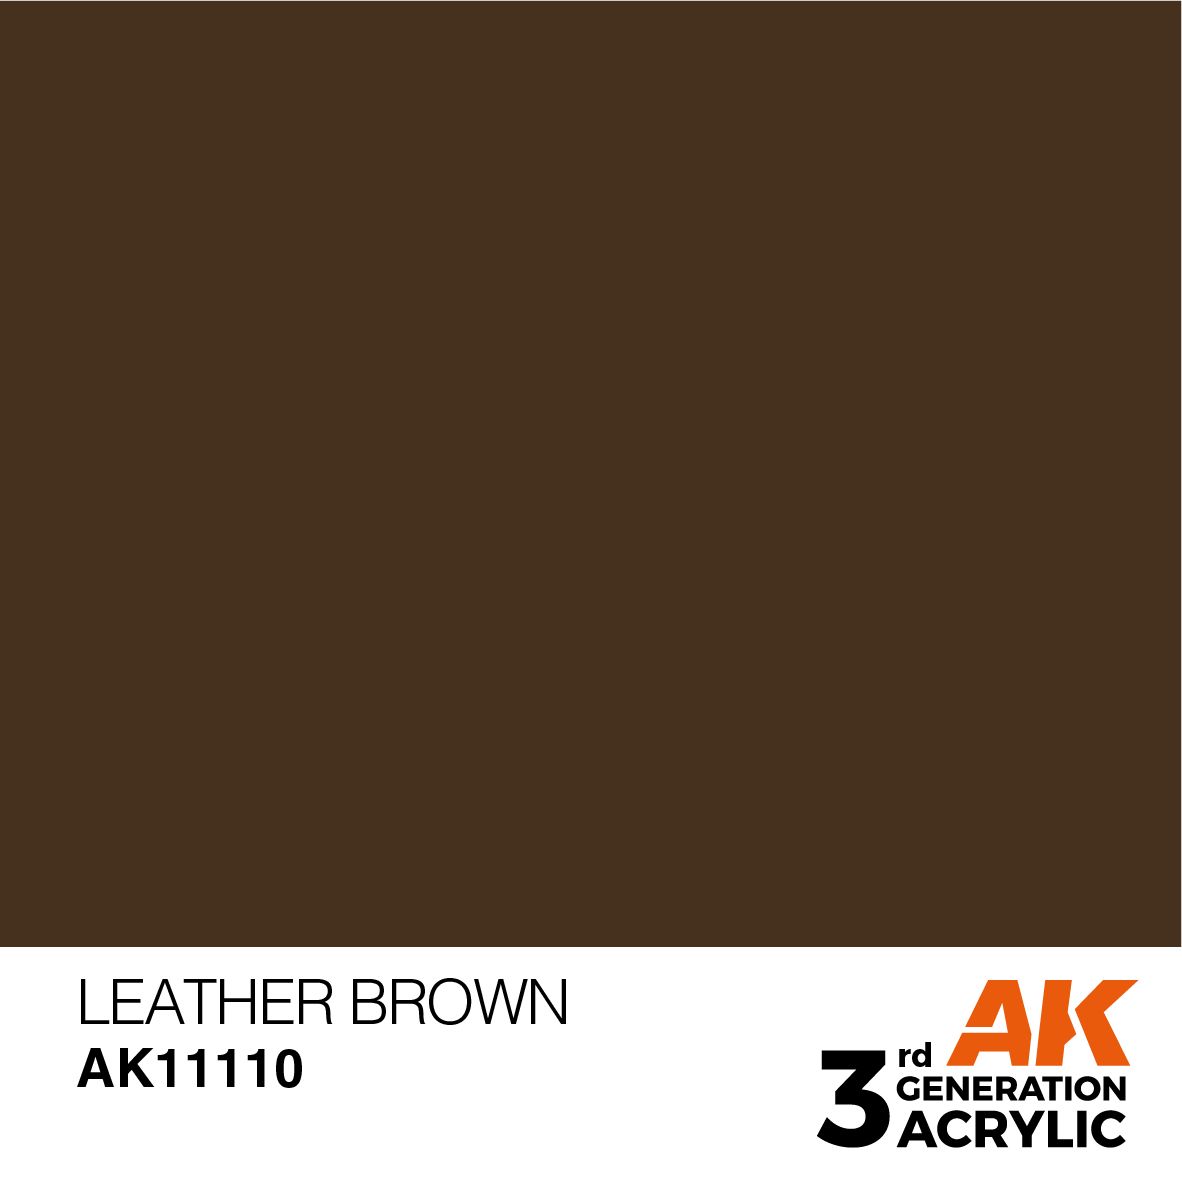 LEATHER BROWN – STANDARD